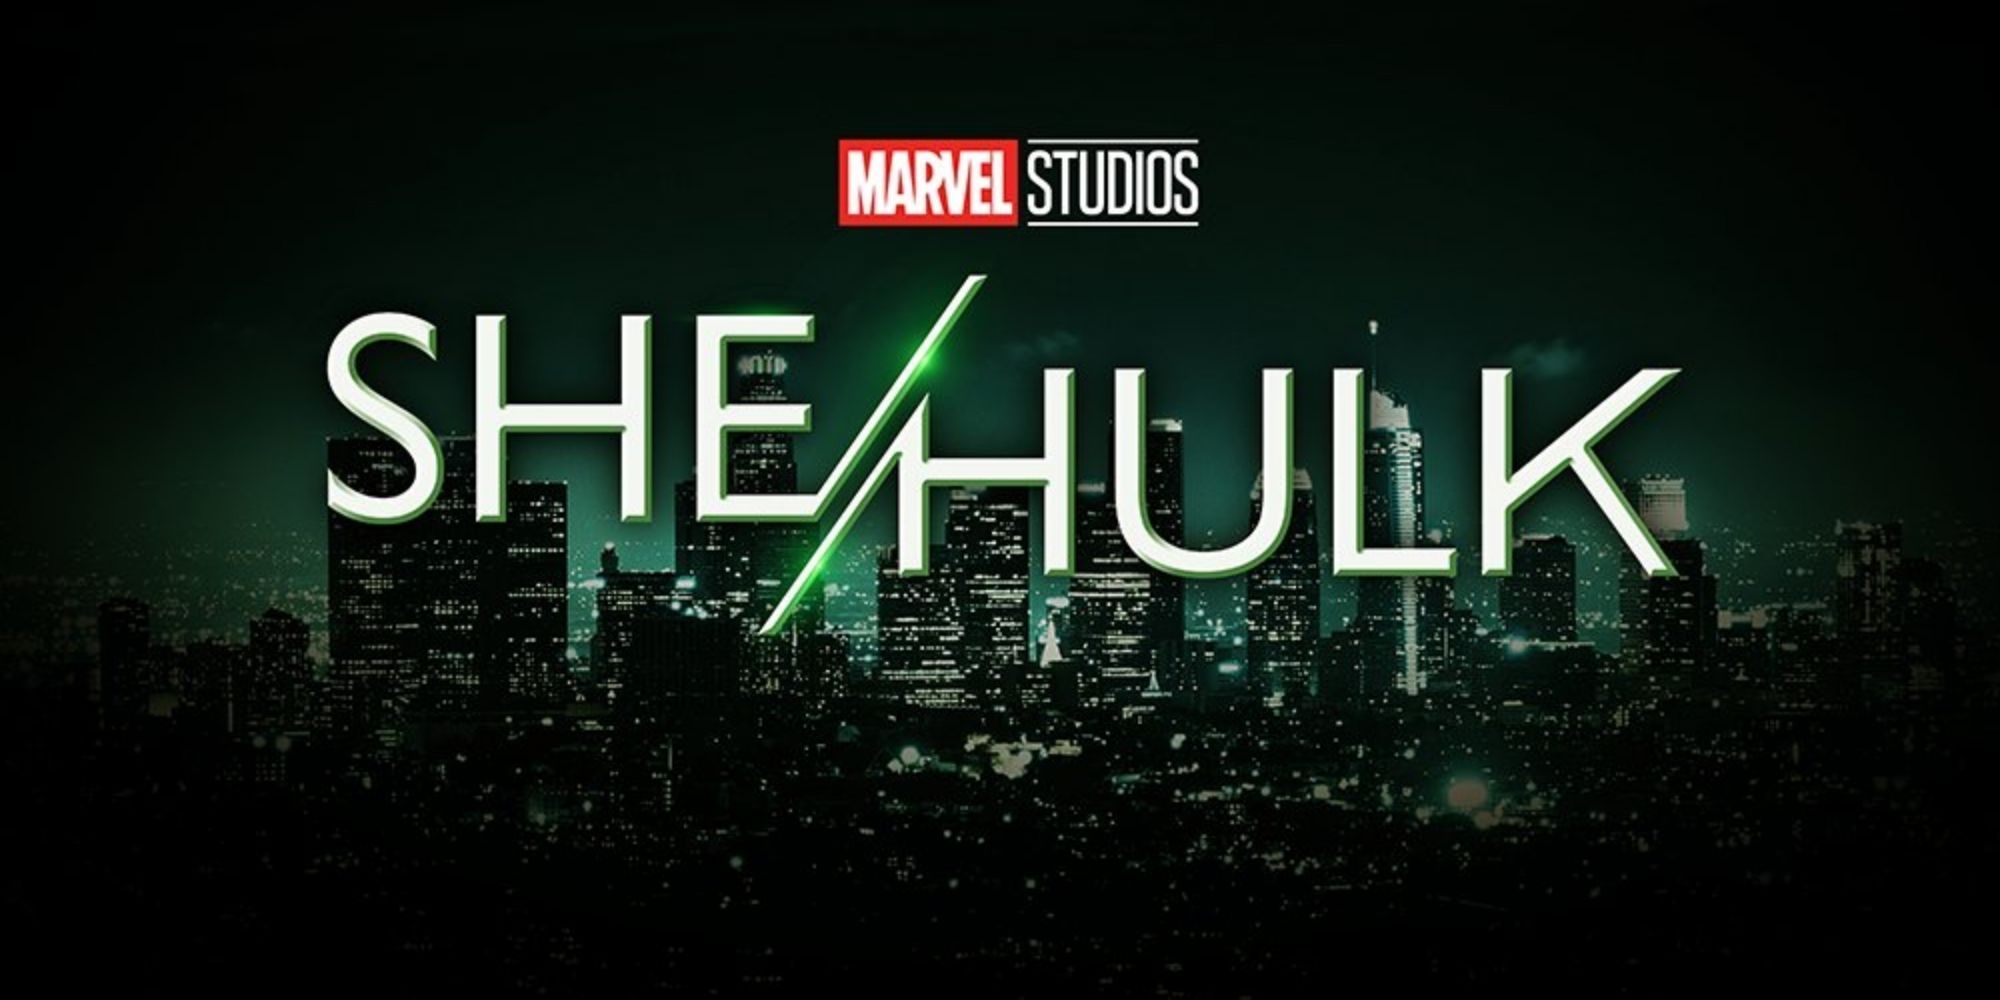 Official logo of the She-Hulk TV shows.